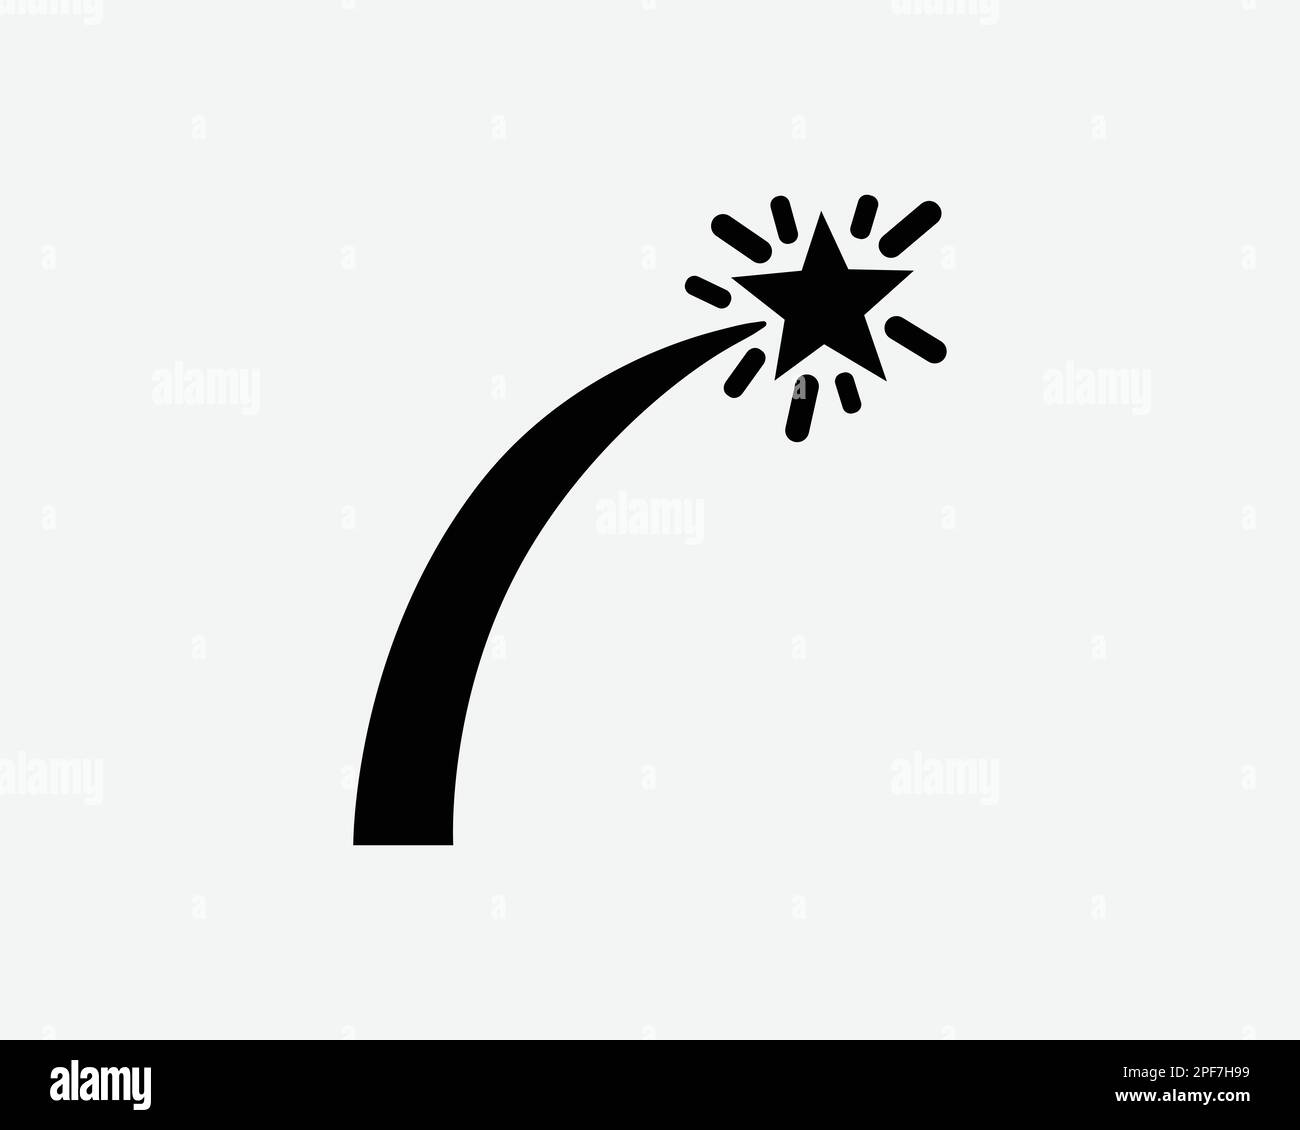 Shooting Star Wishing Fireworks Fire Works Celebrate Black White Silhouette Sign Symbol Icon Graphic Clipart Artwork Illustration Pictogram Vector Stock Vector